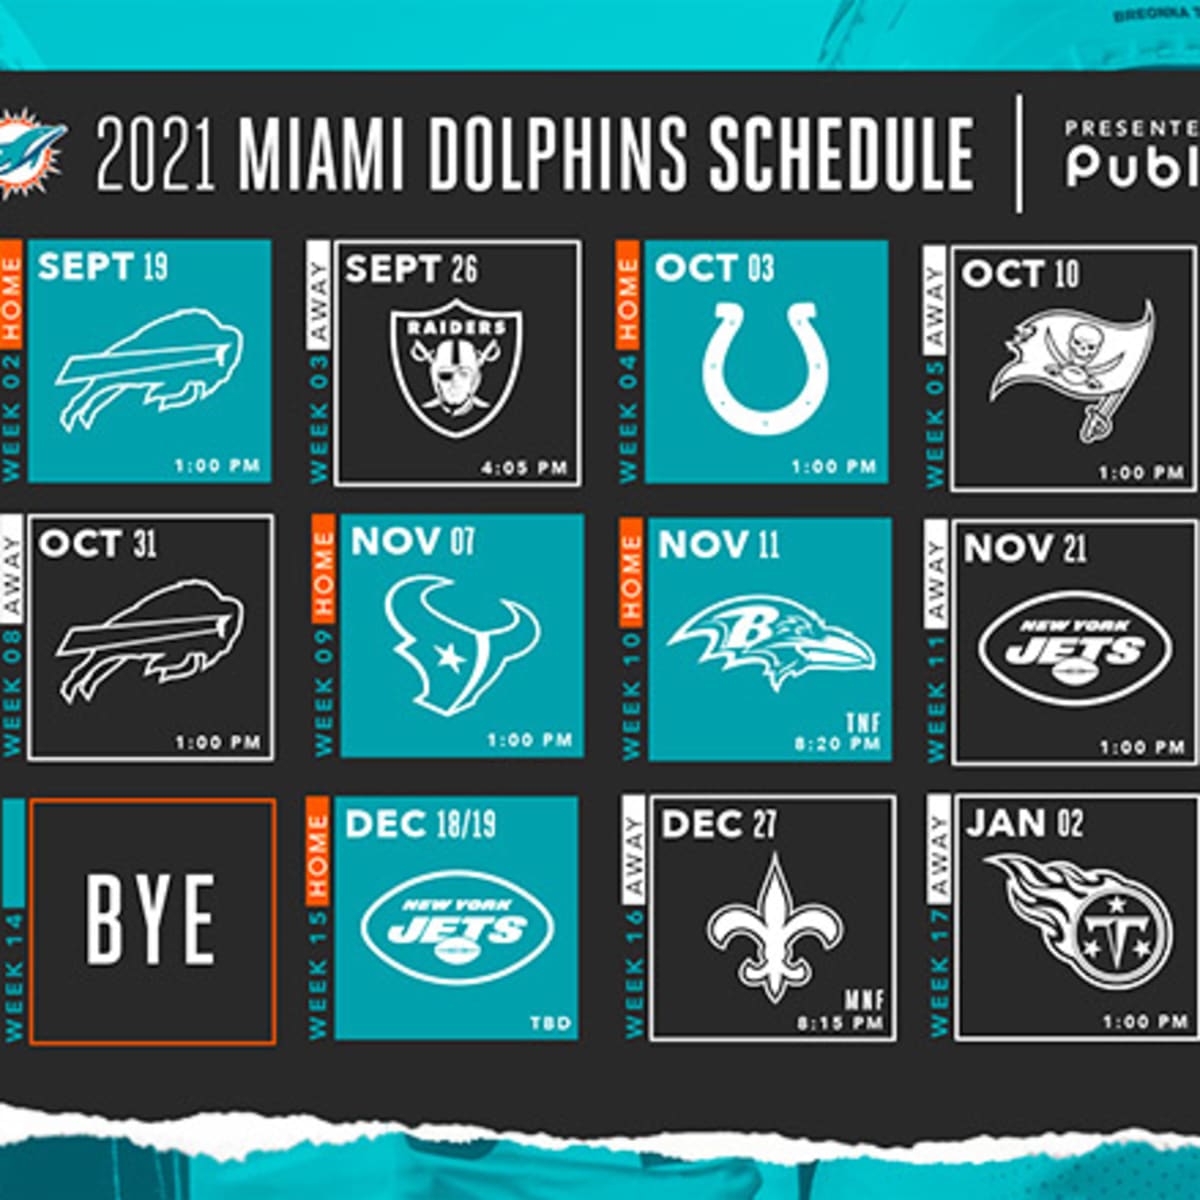 Miami Dolphins Schedule 2022 Miami Dolphins Schedule 2021 - Athlonsports.com | Expert Predictions,  Picks, And Previews